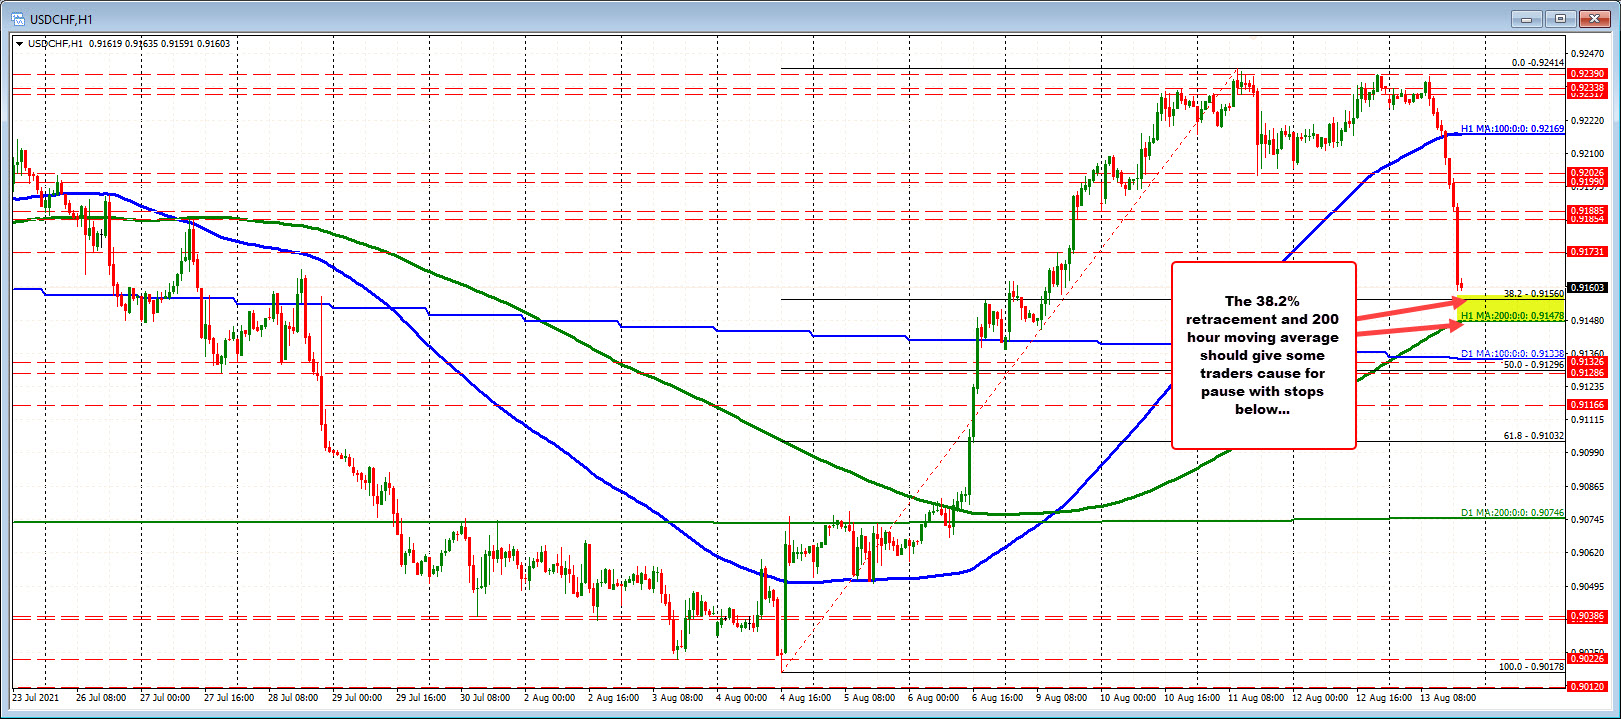 USDCHF is moving toward support defined by the 38.2% retracement and rising 200 hour moving average